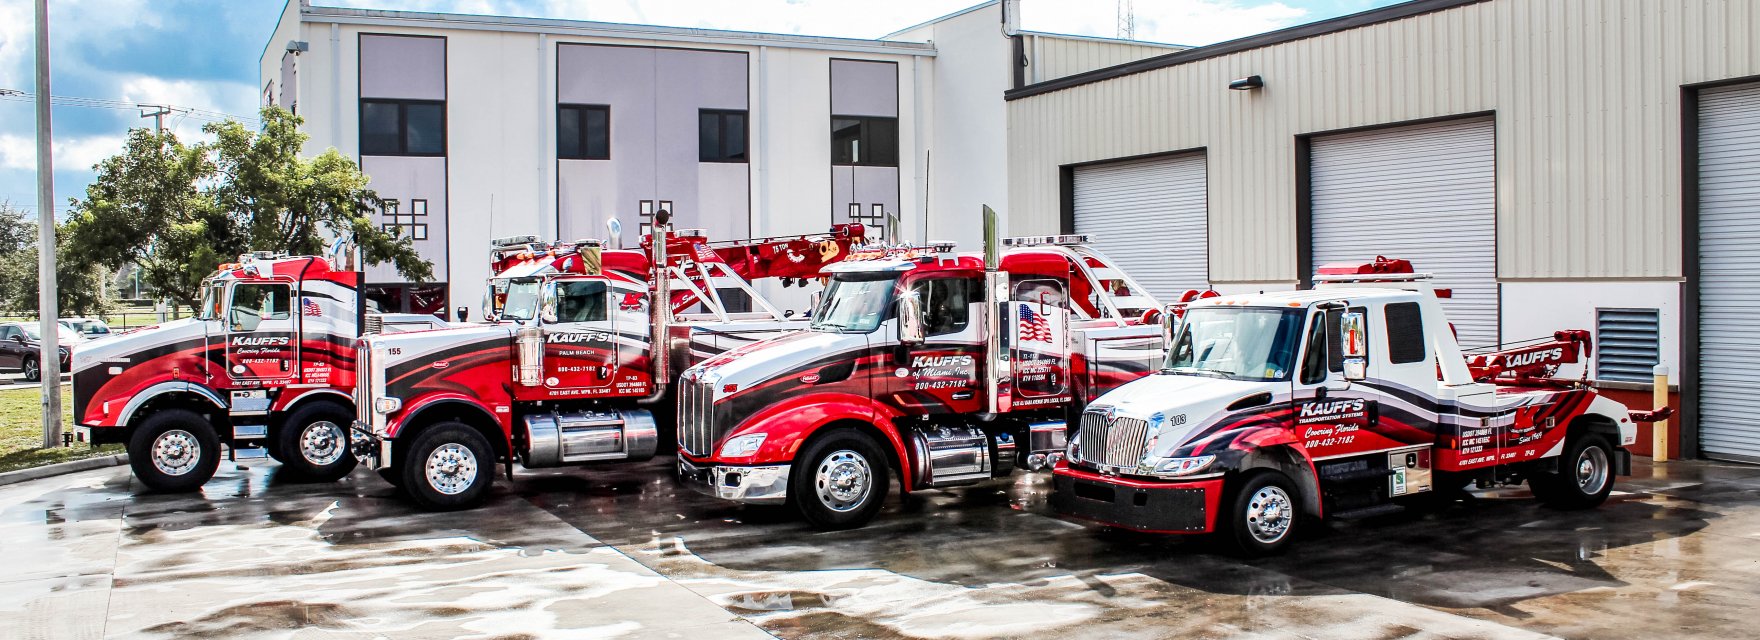 Kauff's Tow Trucks lined-up